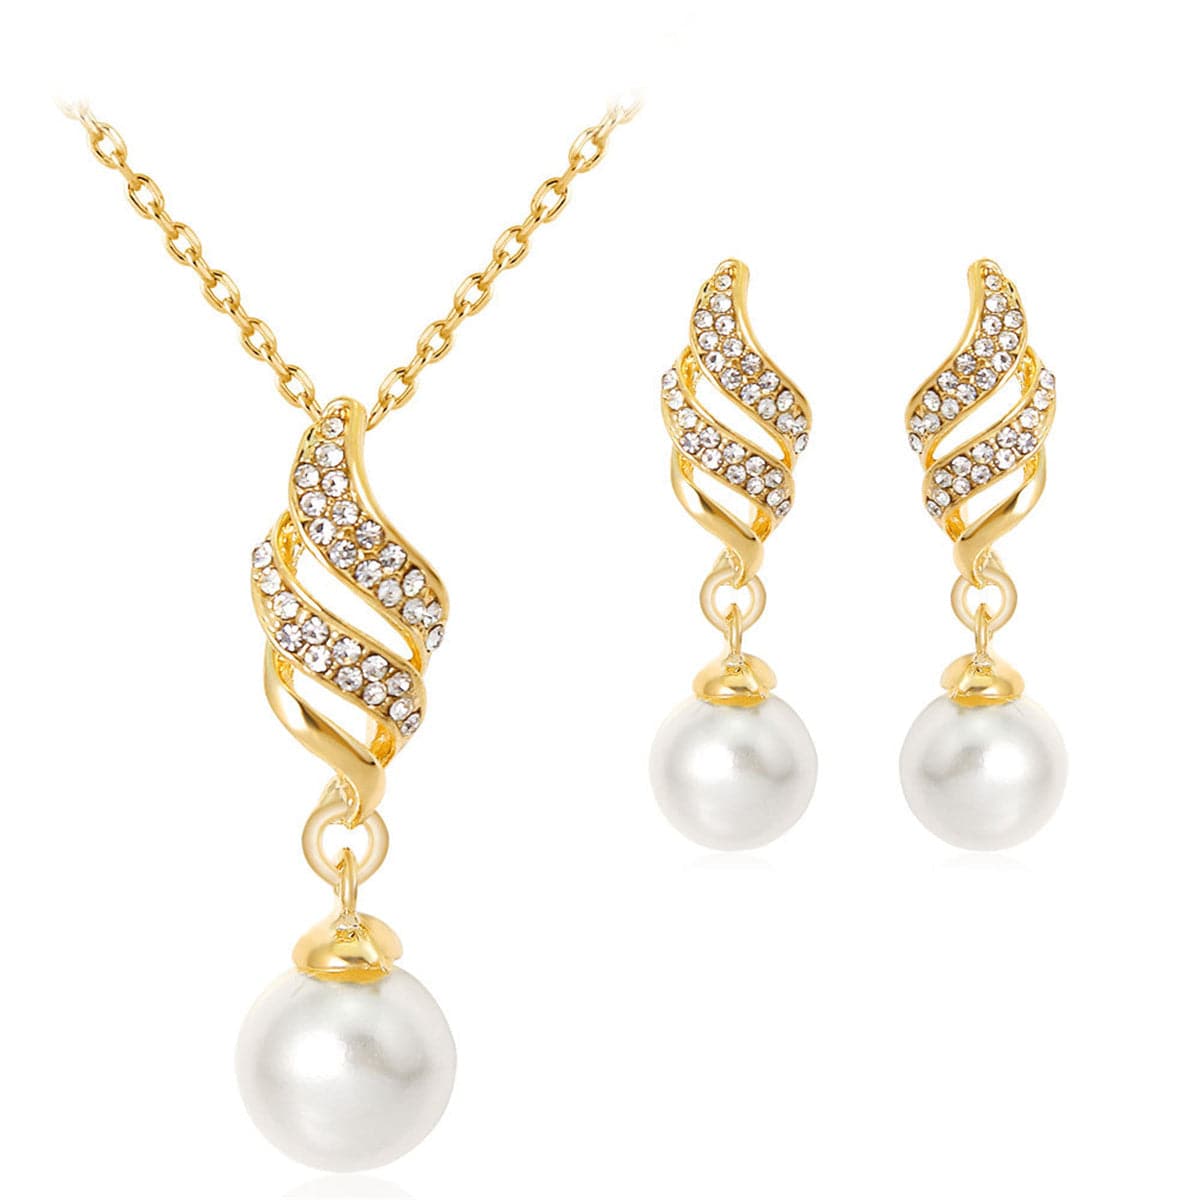 Cubic Zirconia & Pearl 18K Gold-Plated Wing Drop Earrings & Pendant Necklace